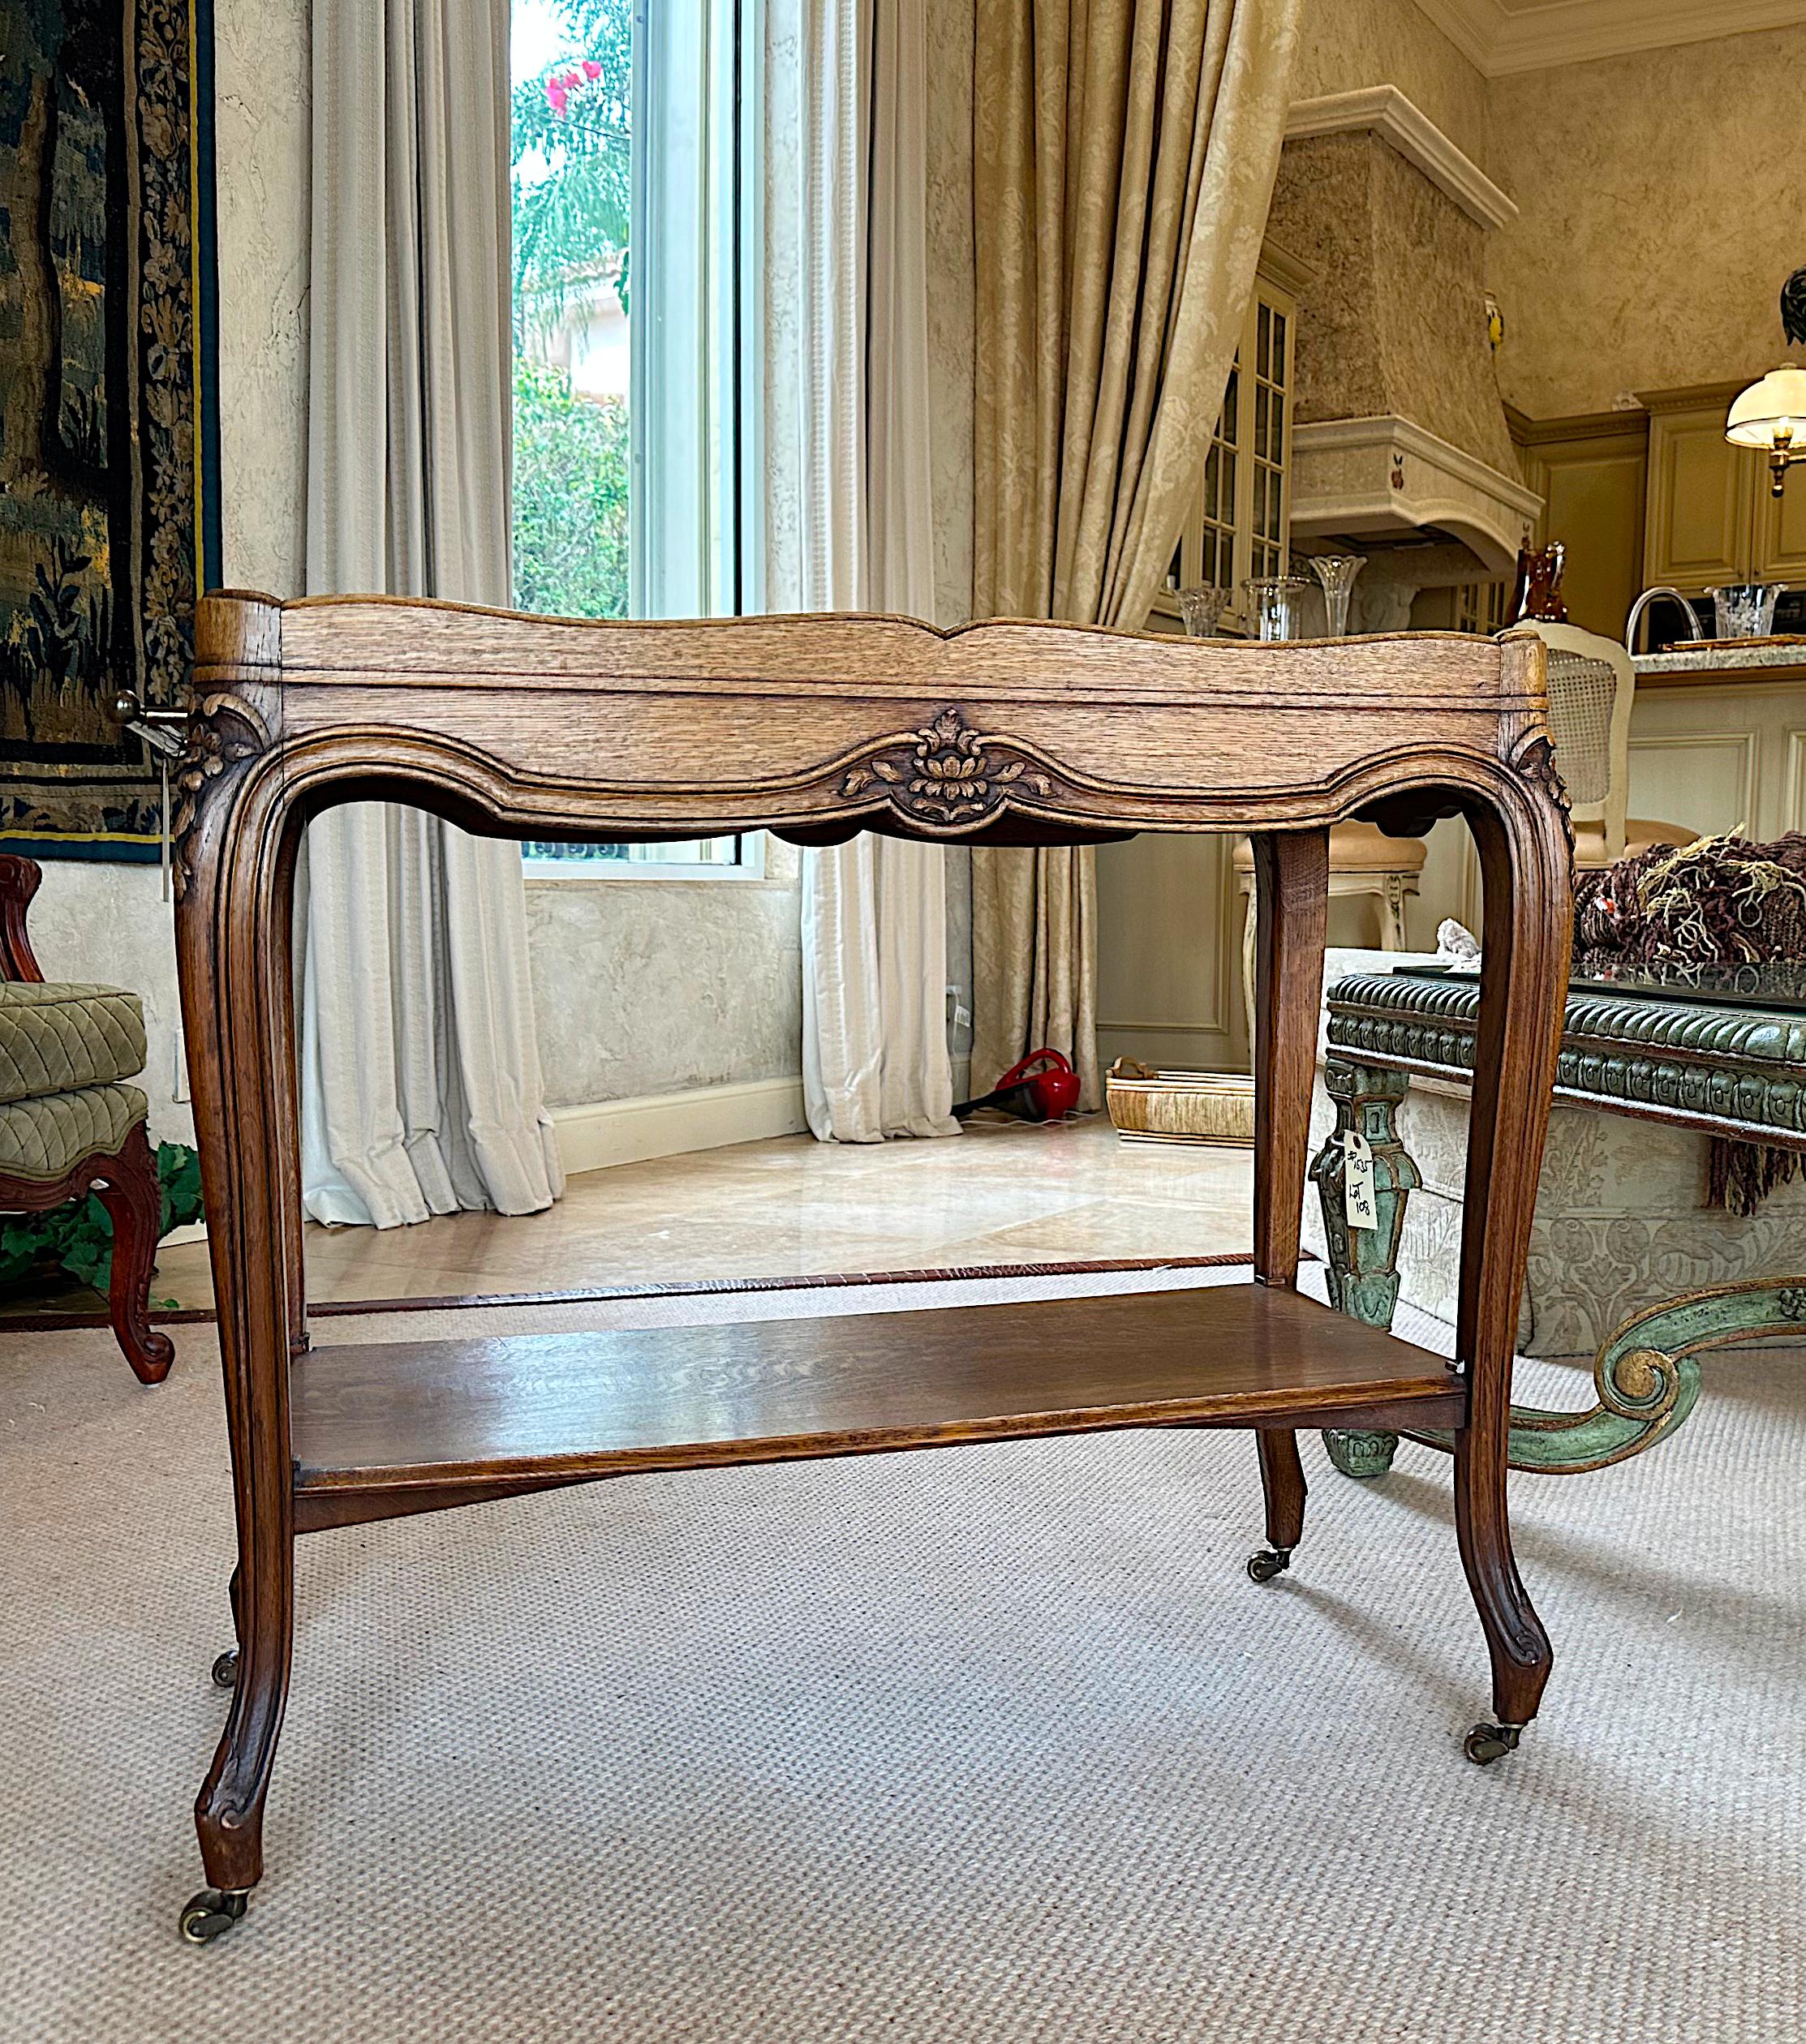 
Louis XV Style Mirror-Inset Wood Serving Table 
Rectangular, with a wooden gallery, and brass hand-hold at one side, on cabriole legs, joined by a shelf stretcher.
Height 30 in. (16.2 cm.), Width 35 in. (88.9 cm.), Depth 17 in. 43.18 cm.)